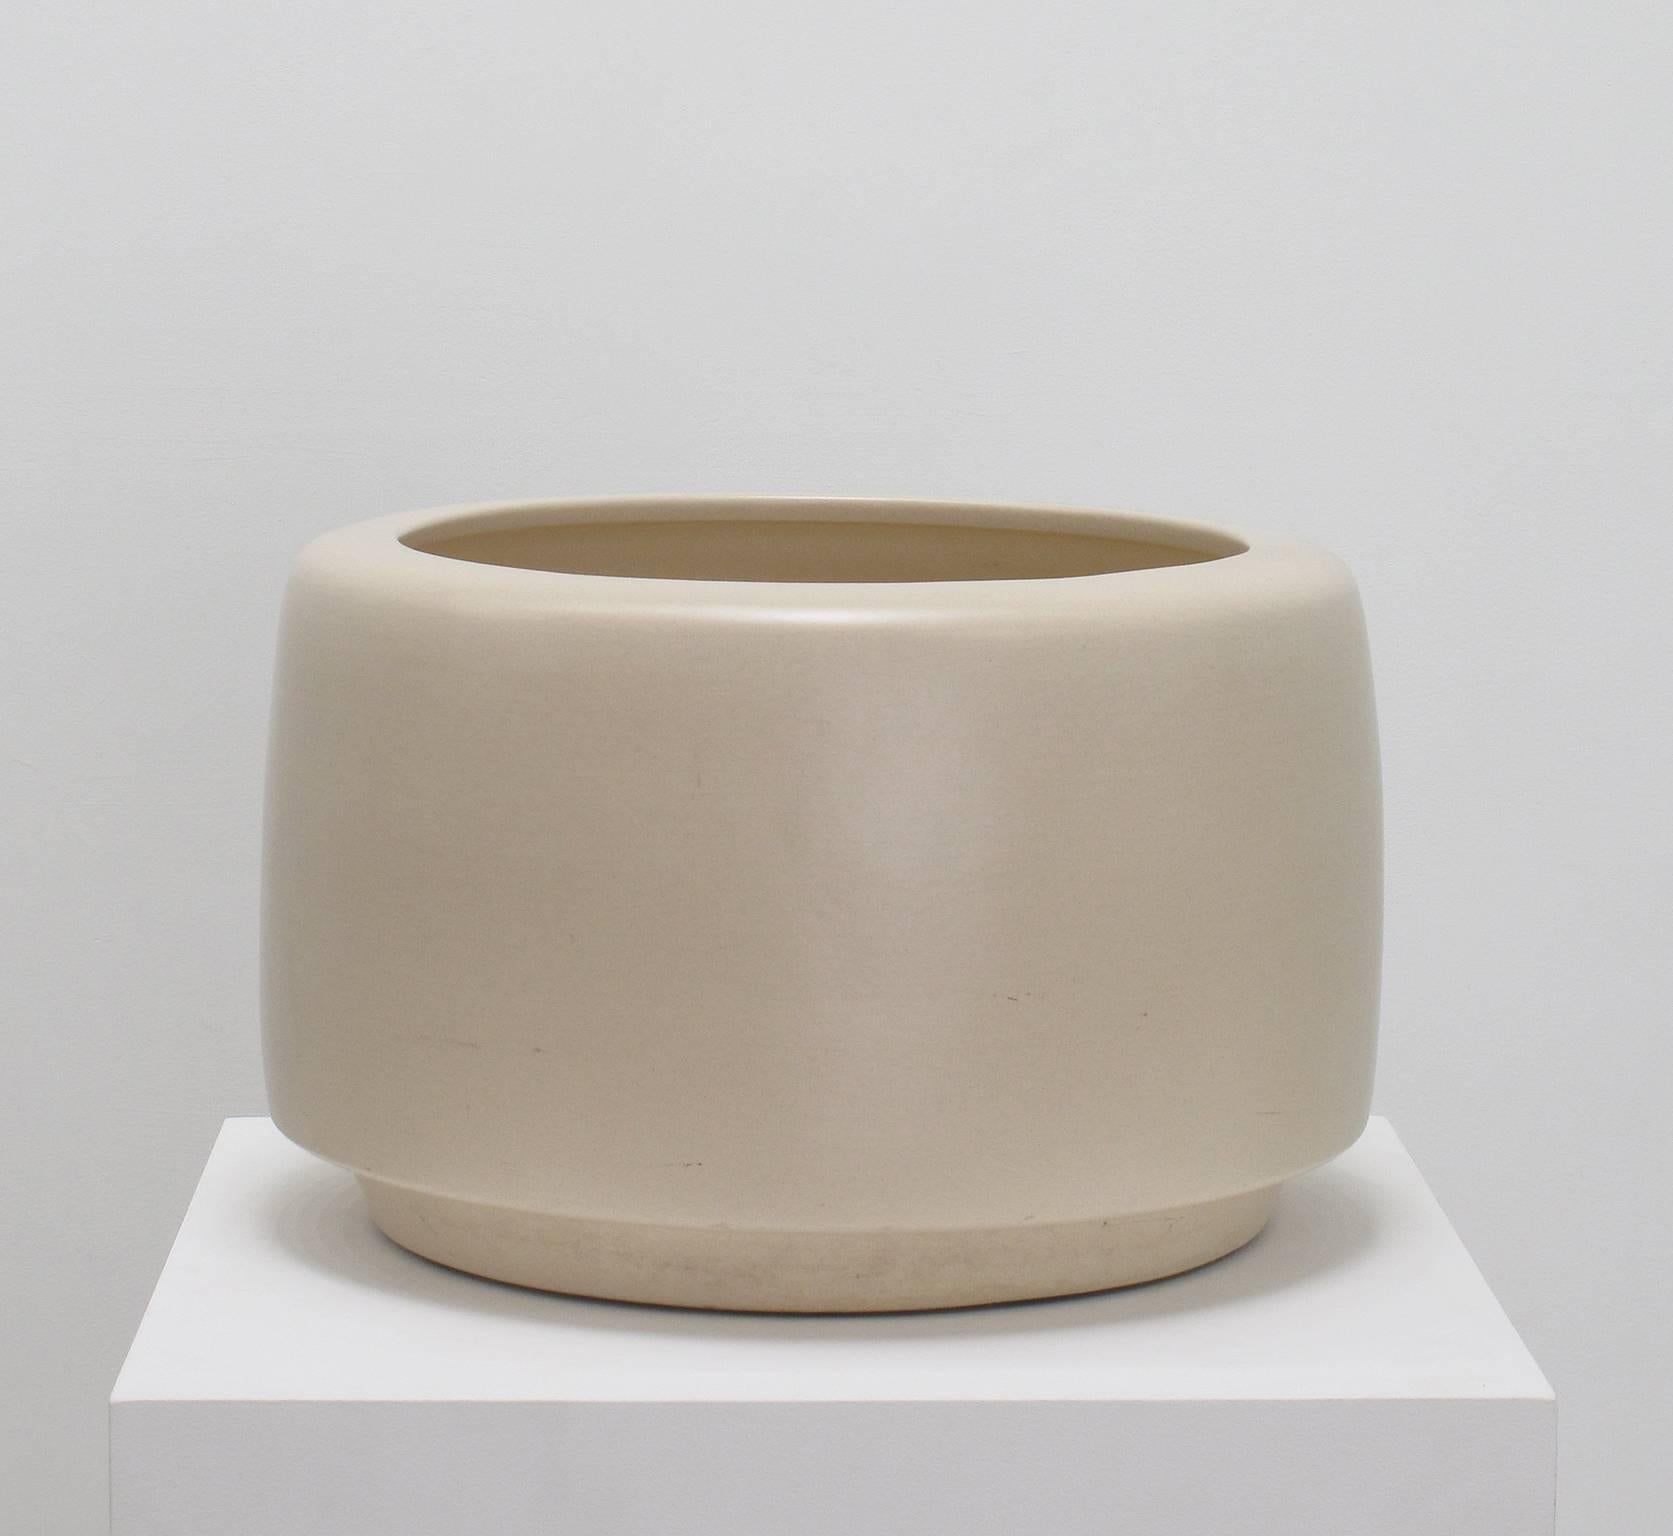 Iconic, California Modern planter designed by John Follis, earthenware, glazed, 1950s, architectural pottery, Los Angeles, California. Measures: 11.25 high x 17 diameter inches (28.6 high x 43.2 diameter cm), 28 pounds.